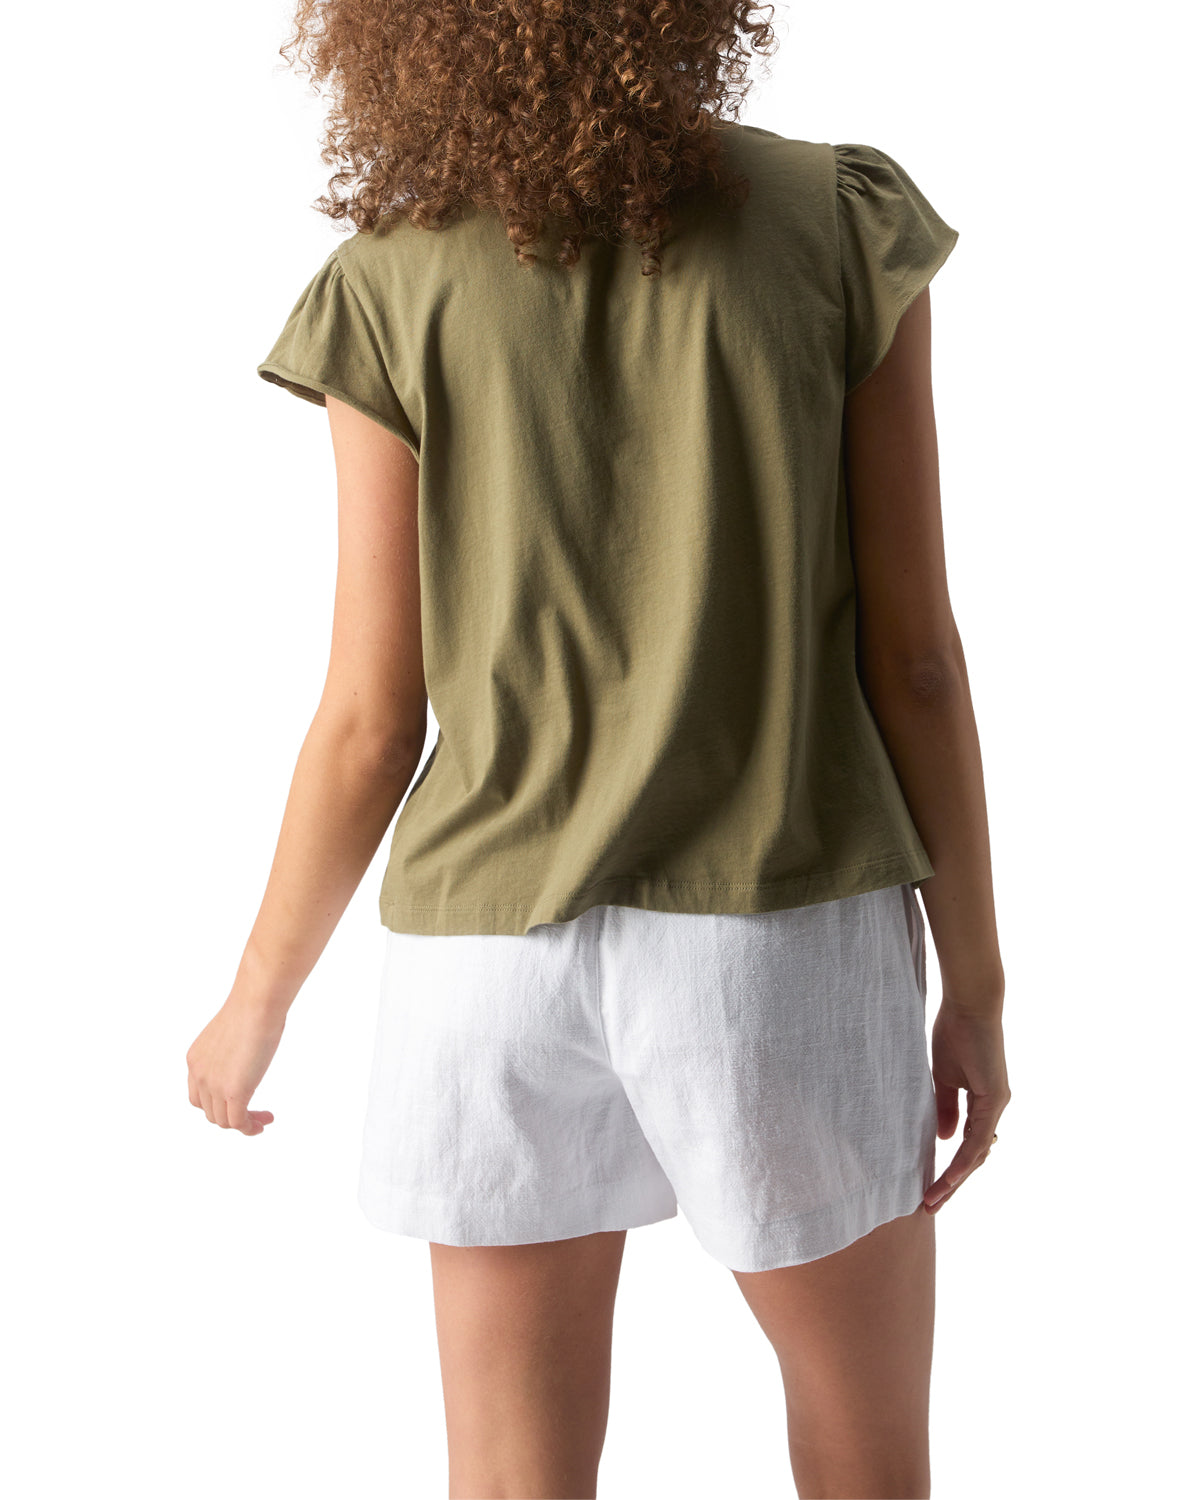 Wild Flower Tee by Sanctuary in Burnt Olive